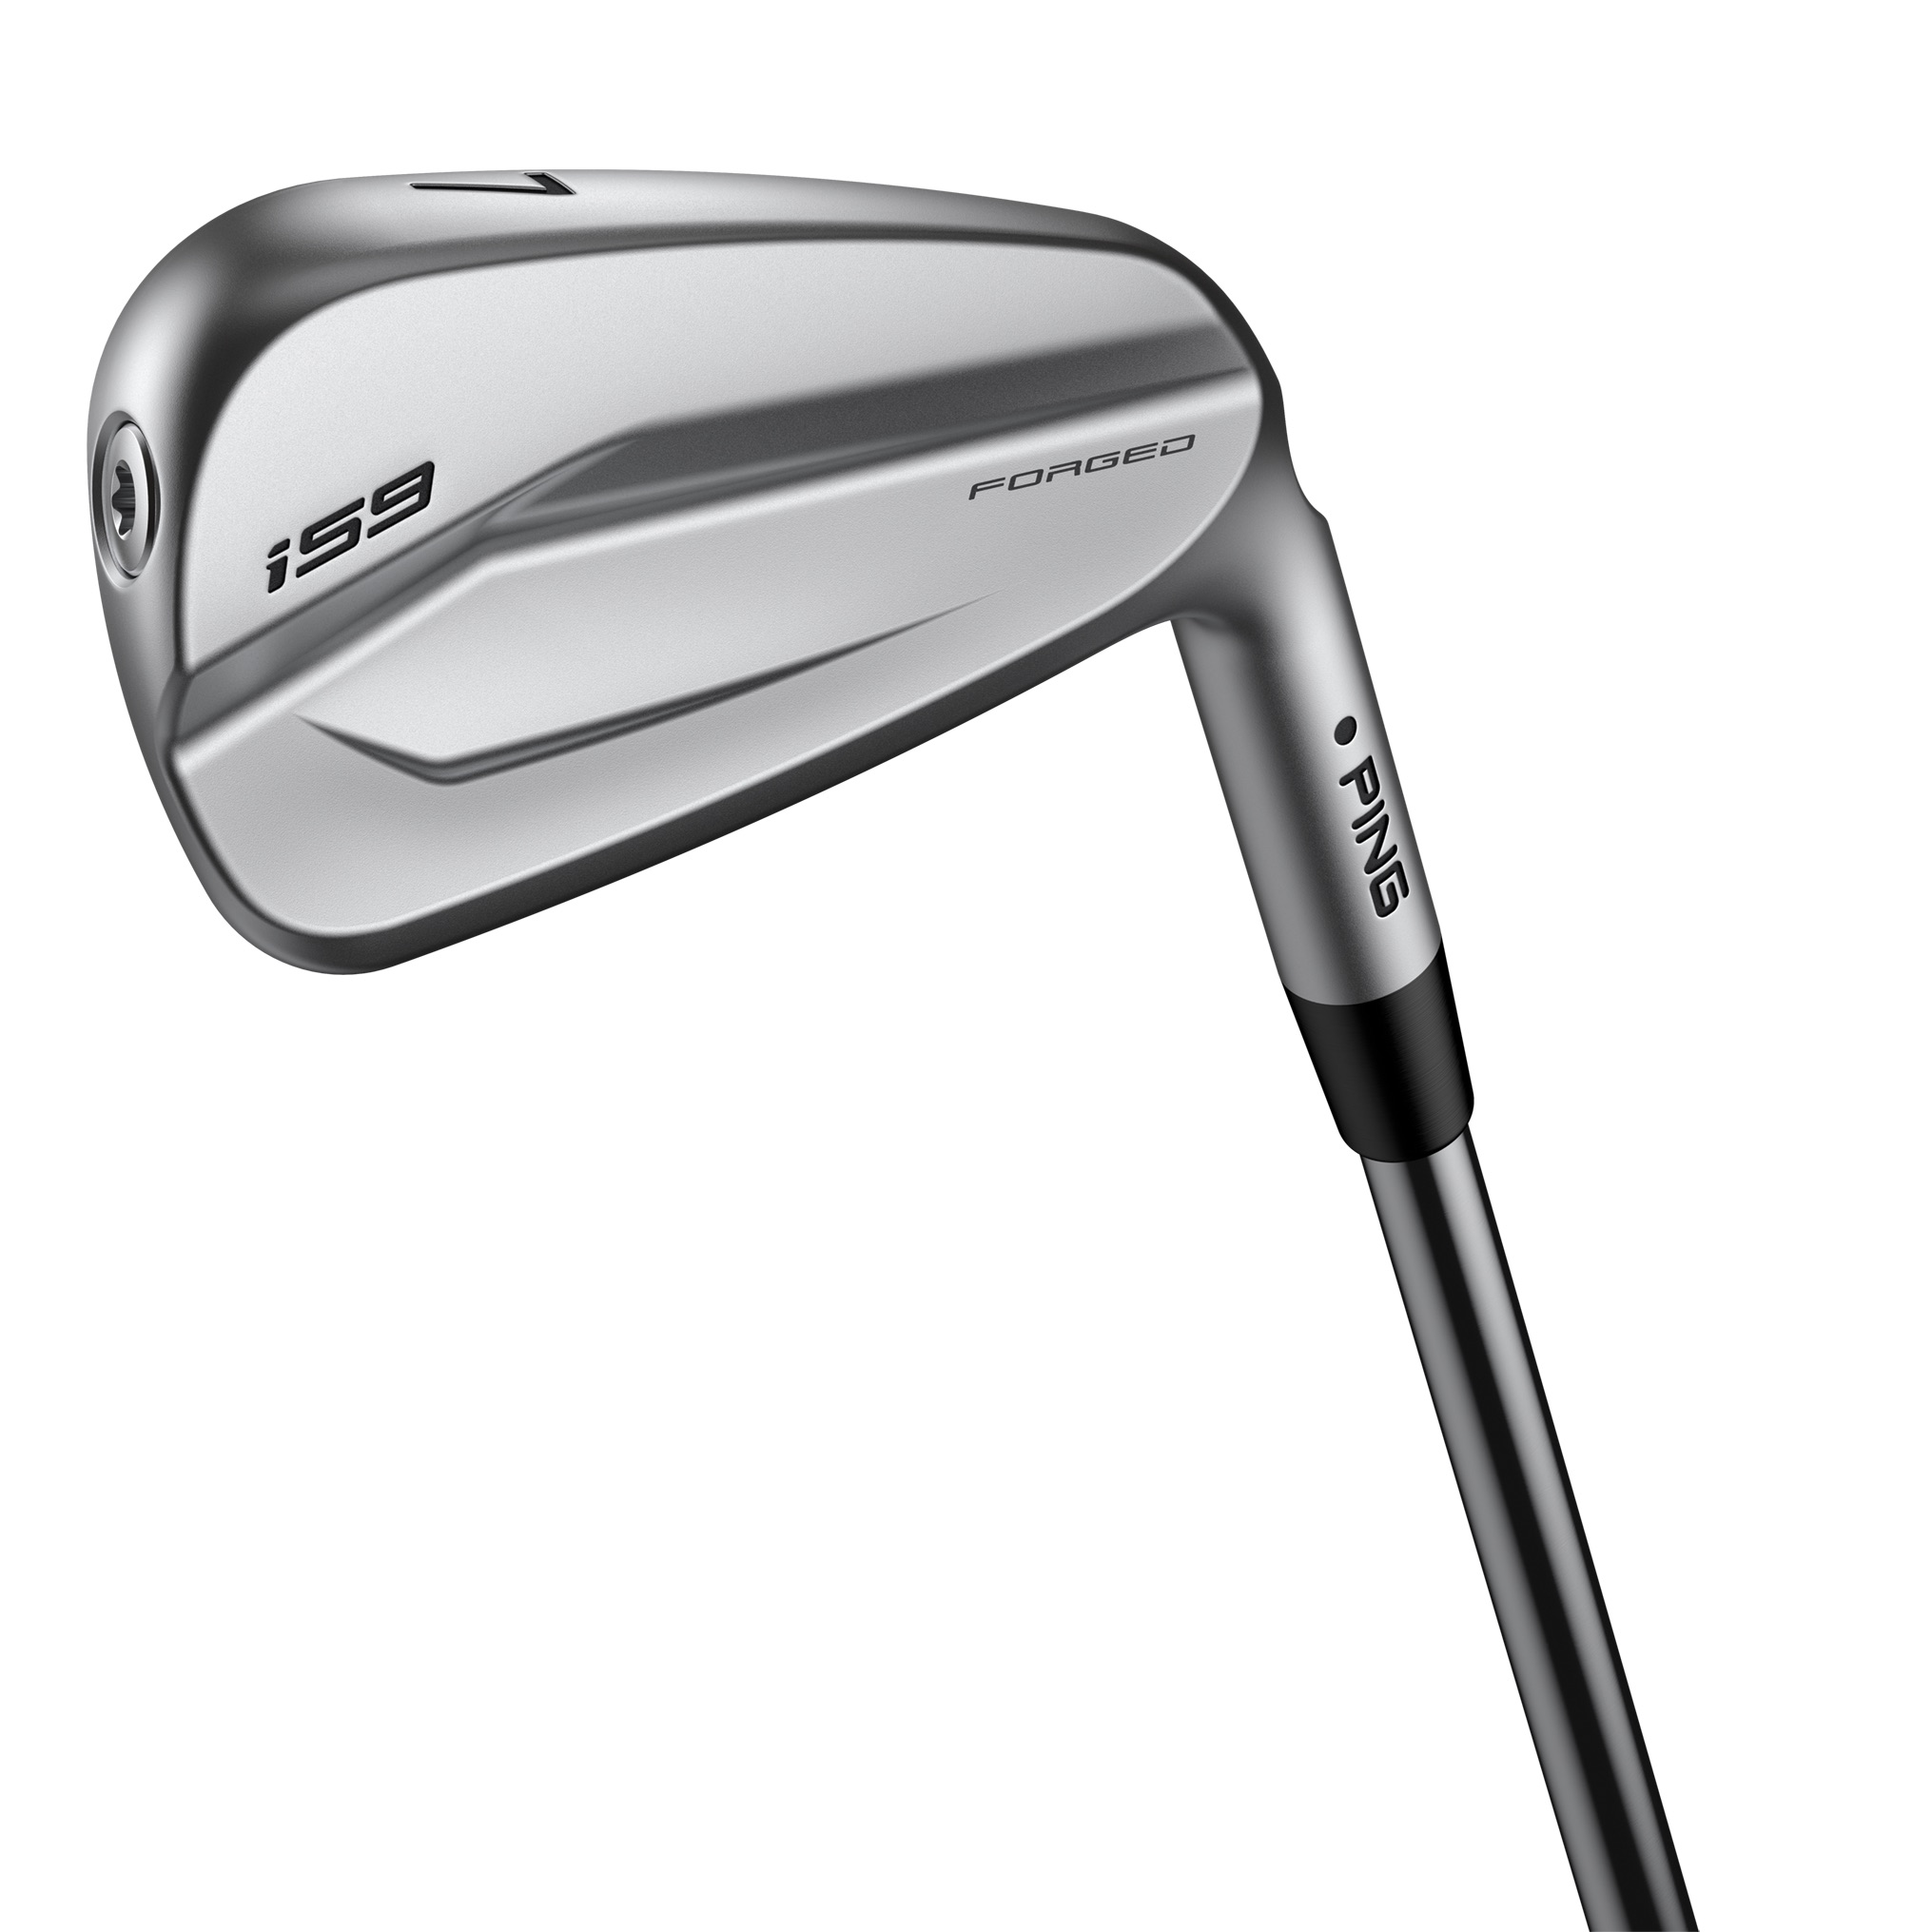 Ping's i59 irons offer max consistency for the discerning player